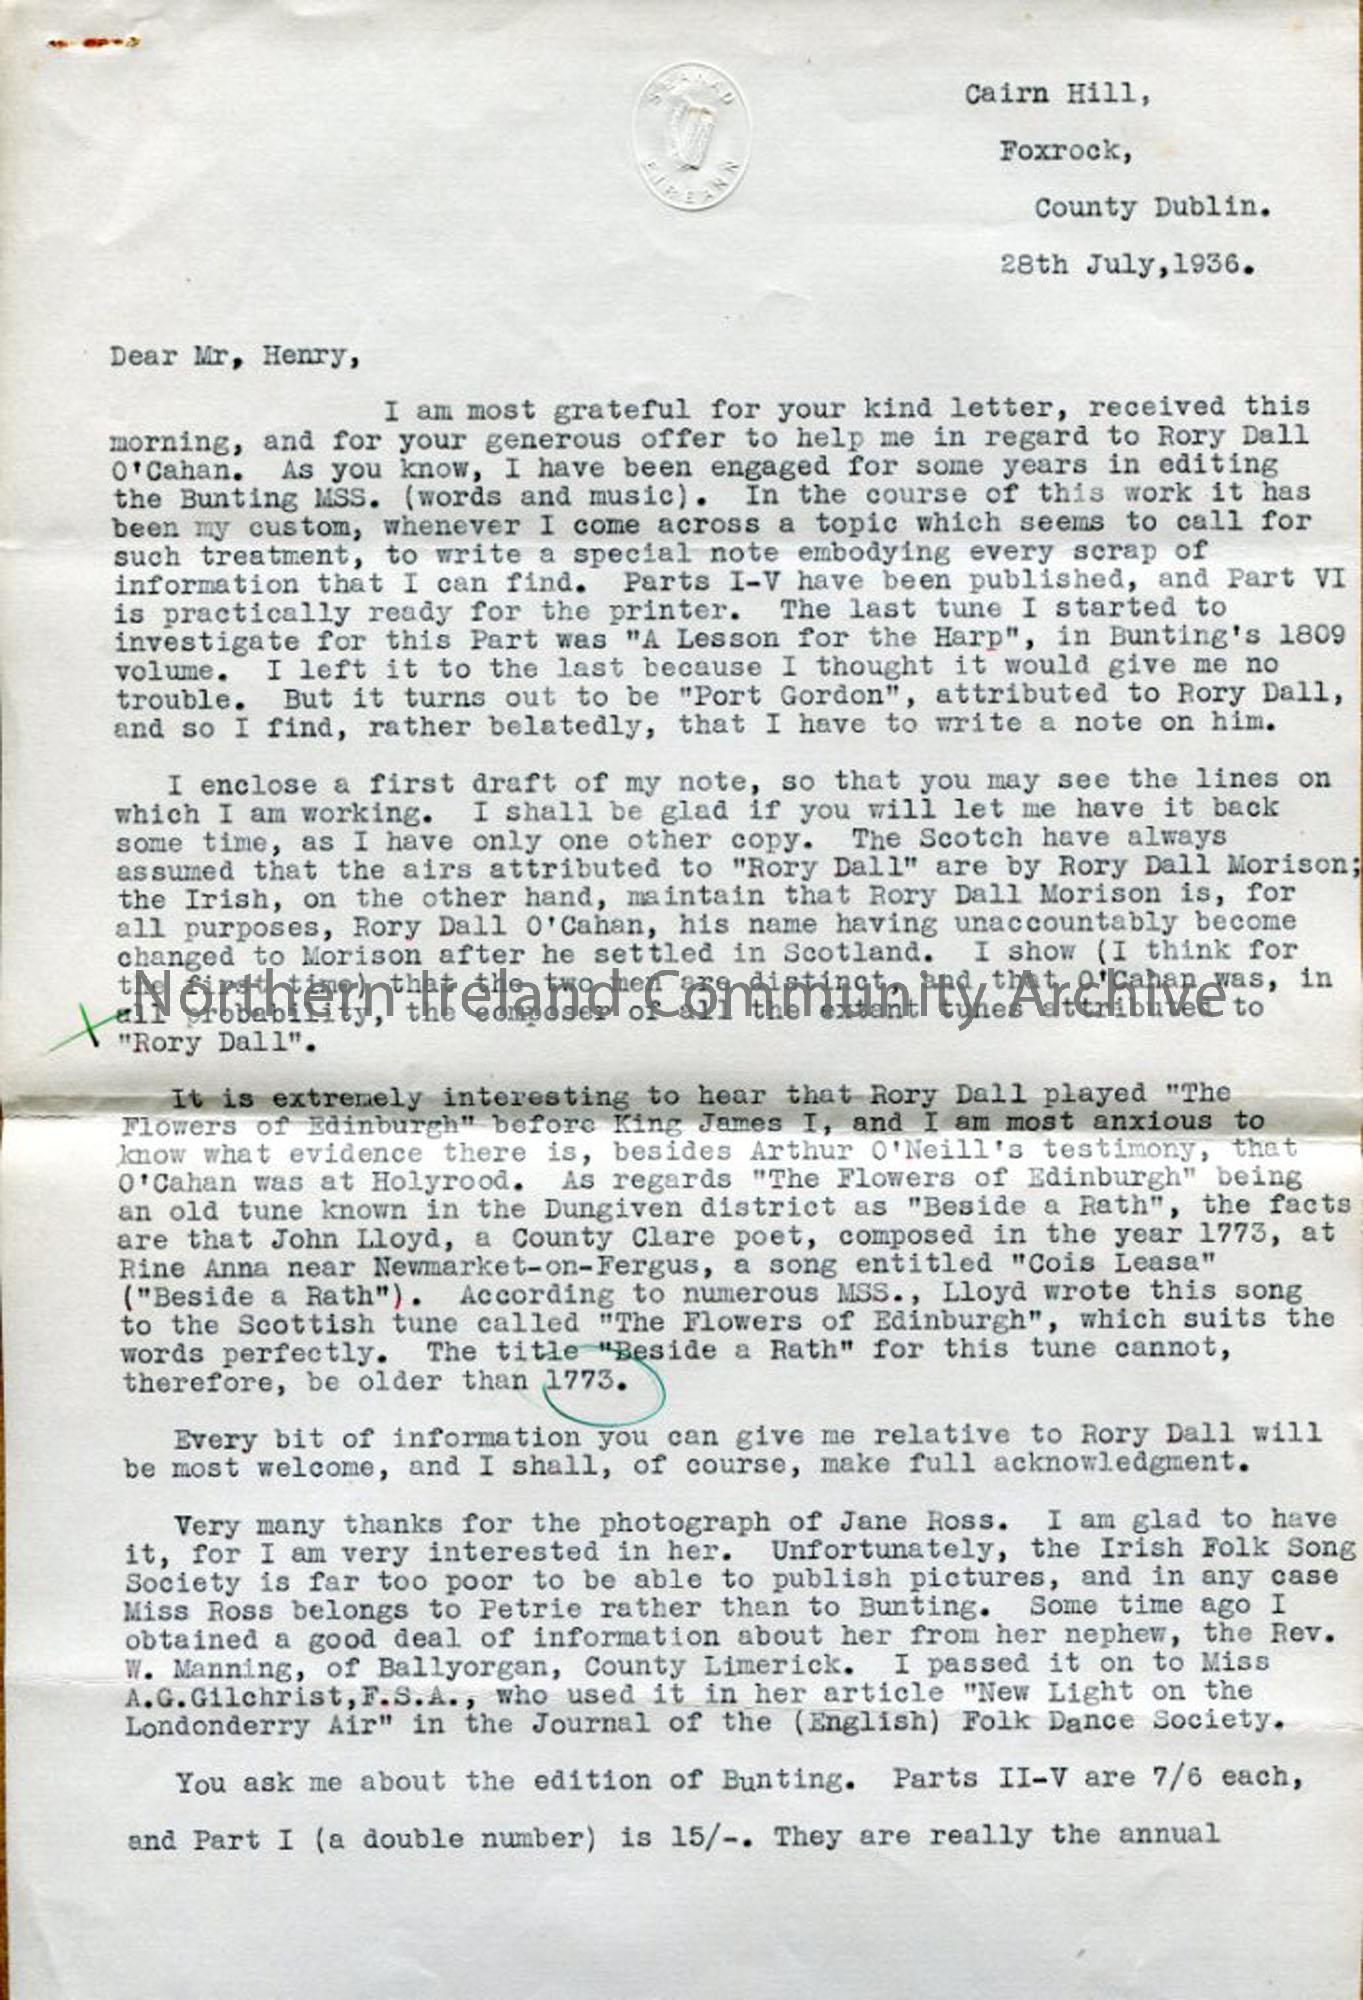 Page one of two – Letter from Donal O’Sullivan, 28.7.1936